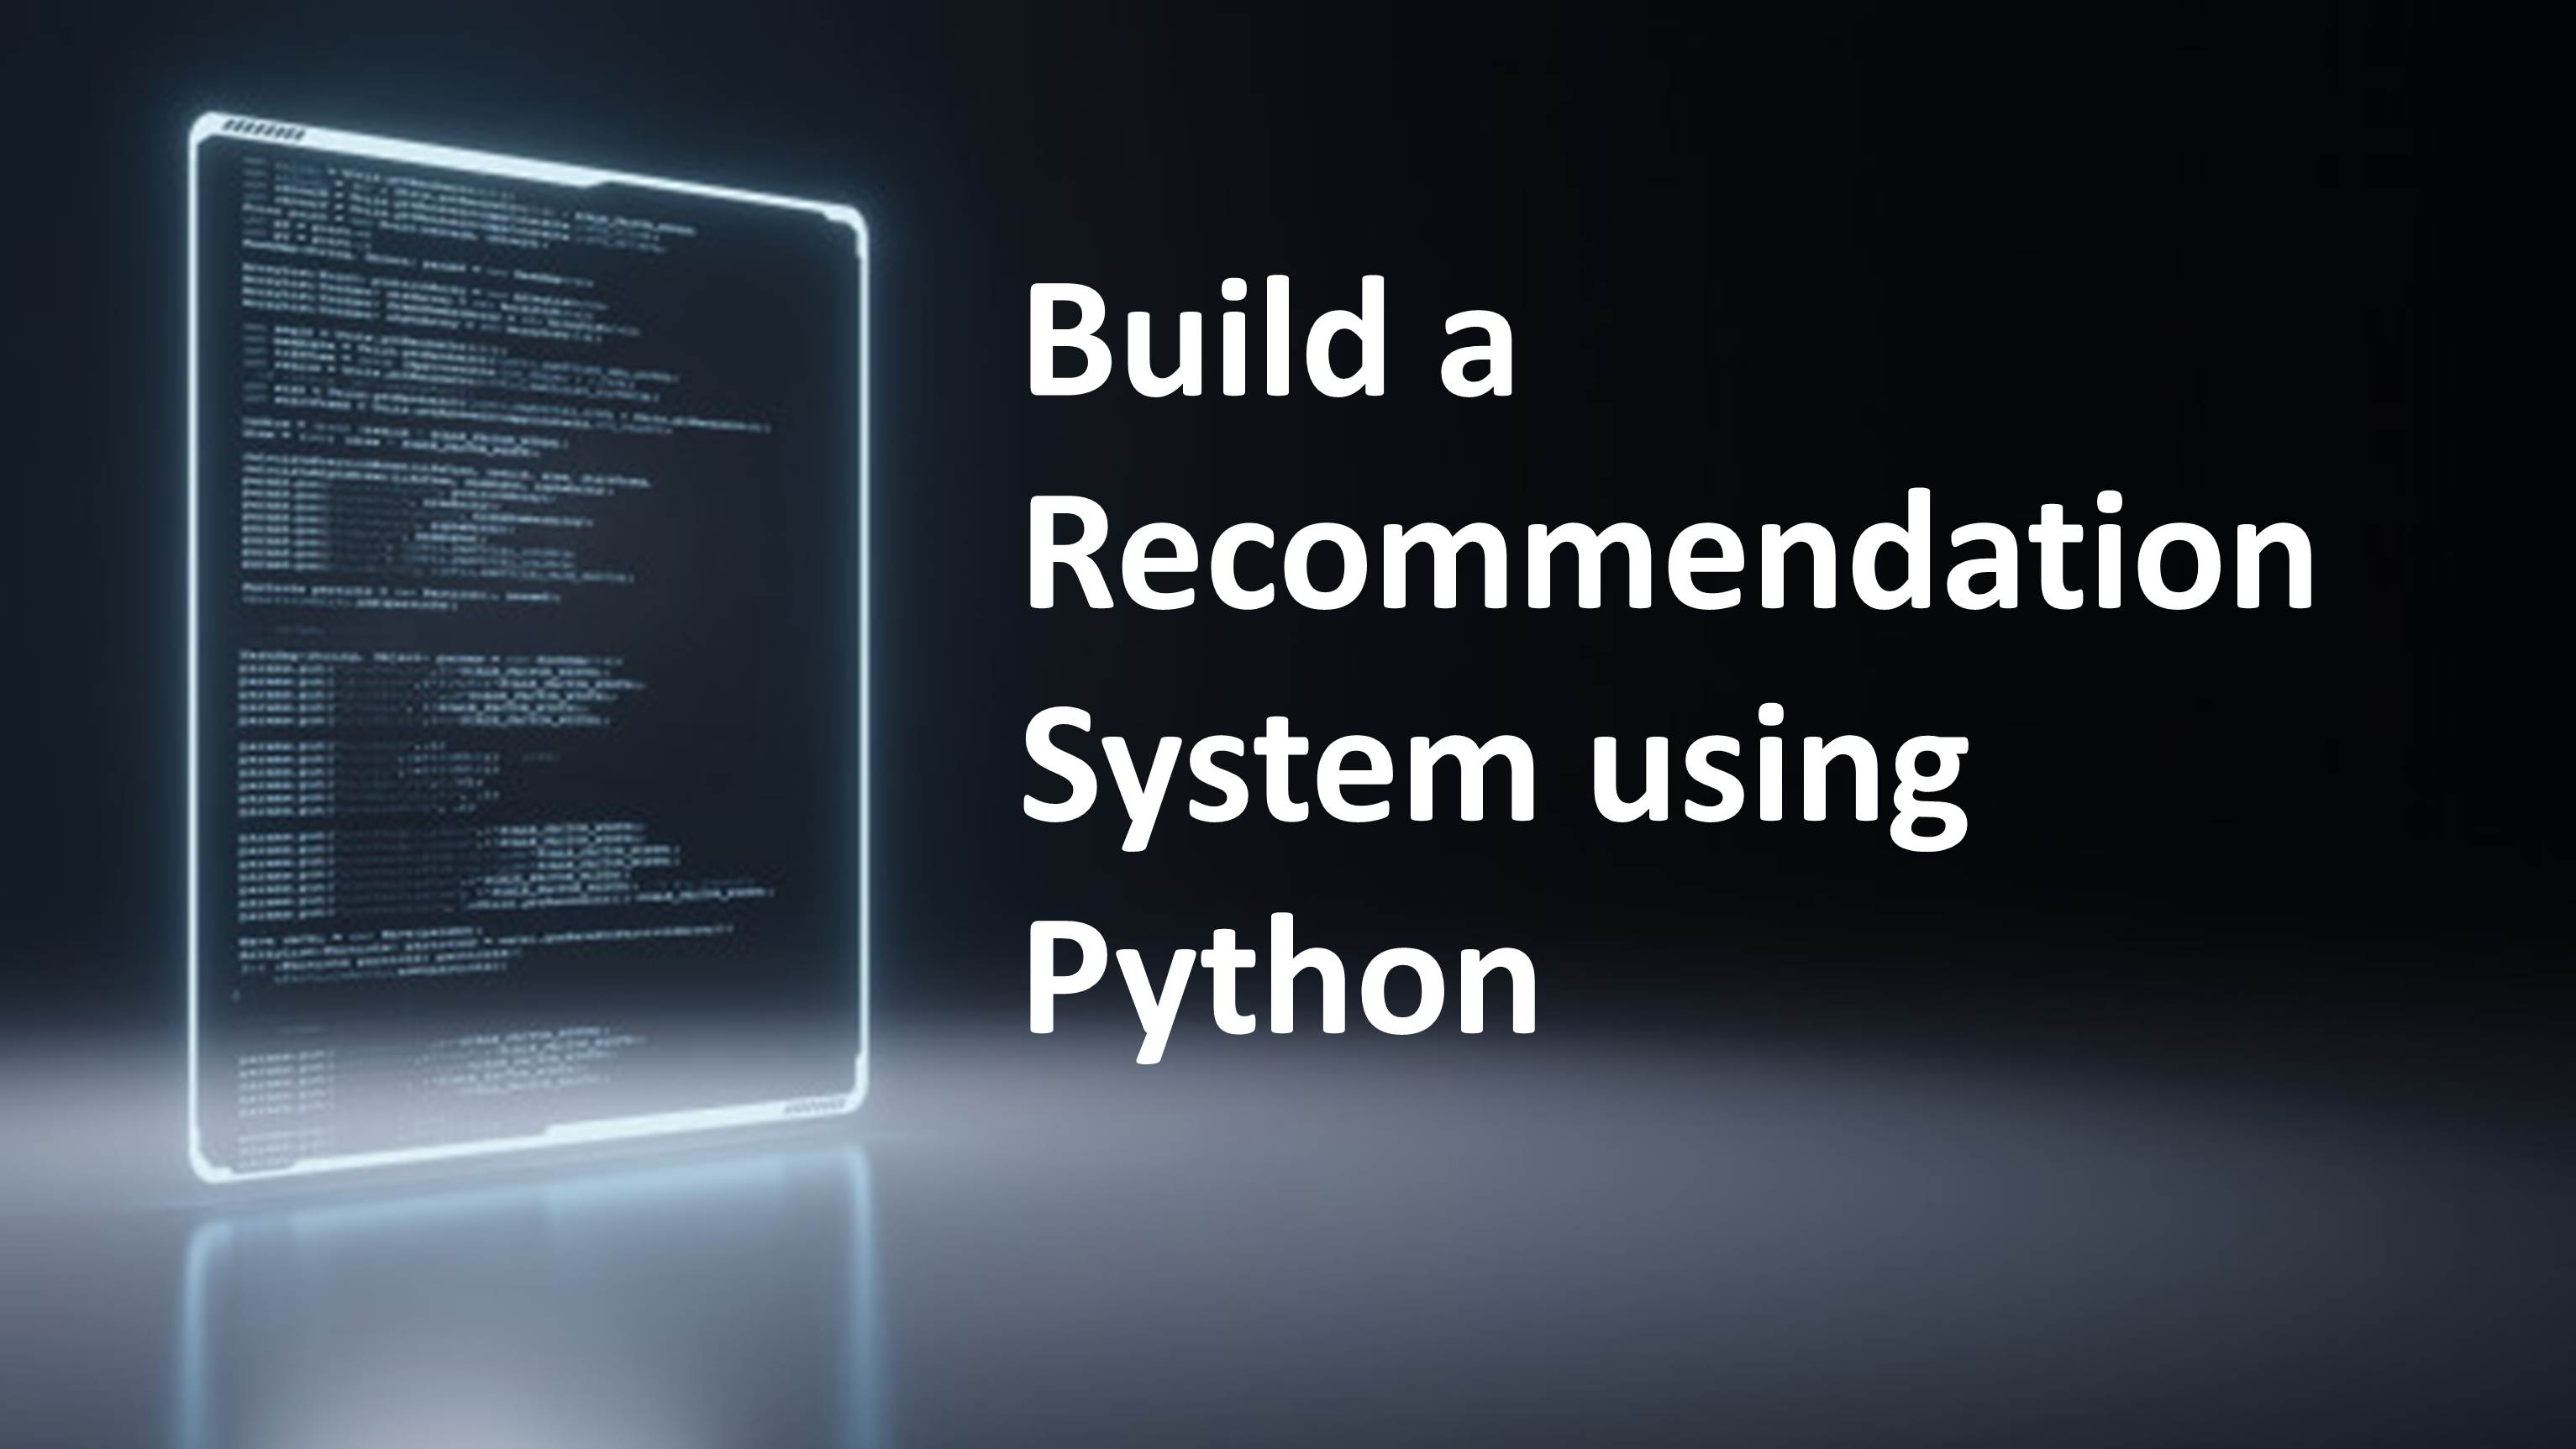 Build a Recommendation System using Python